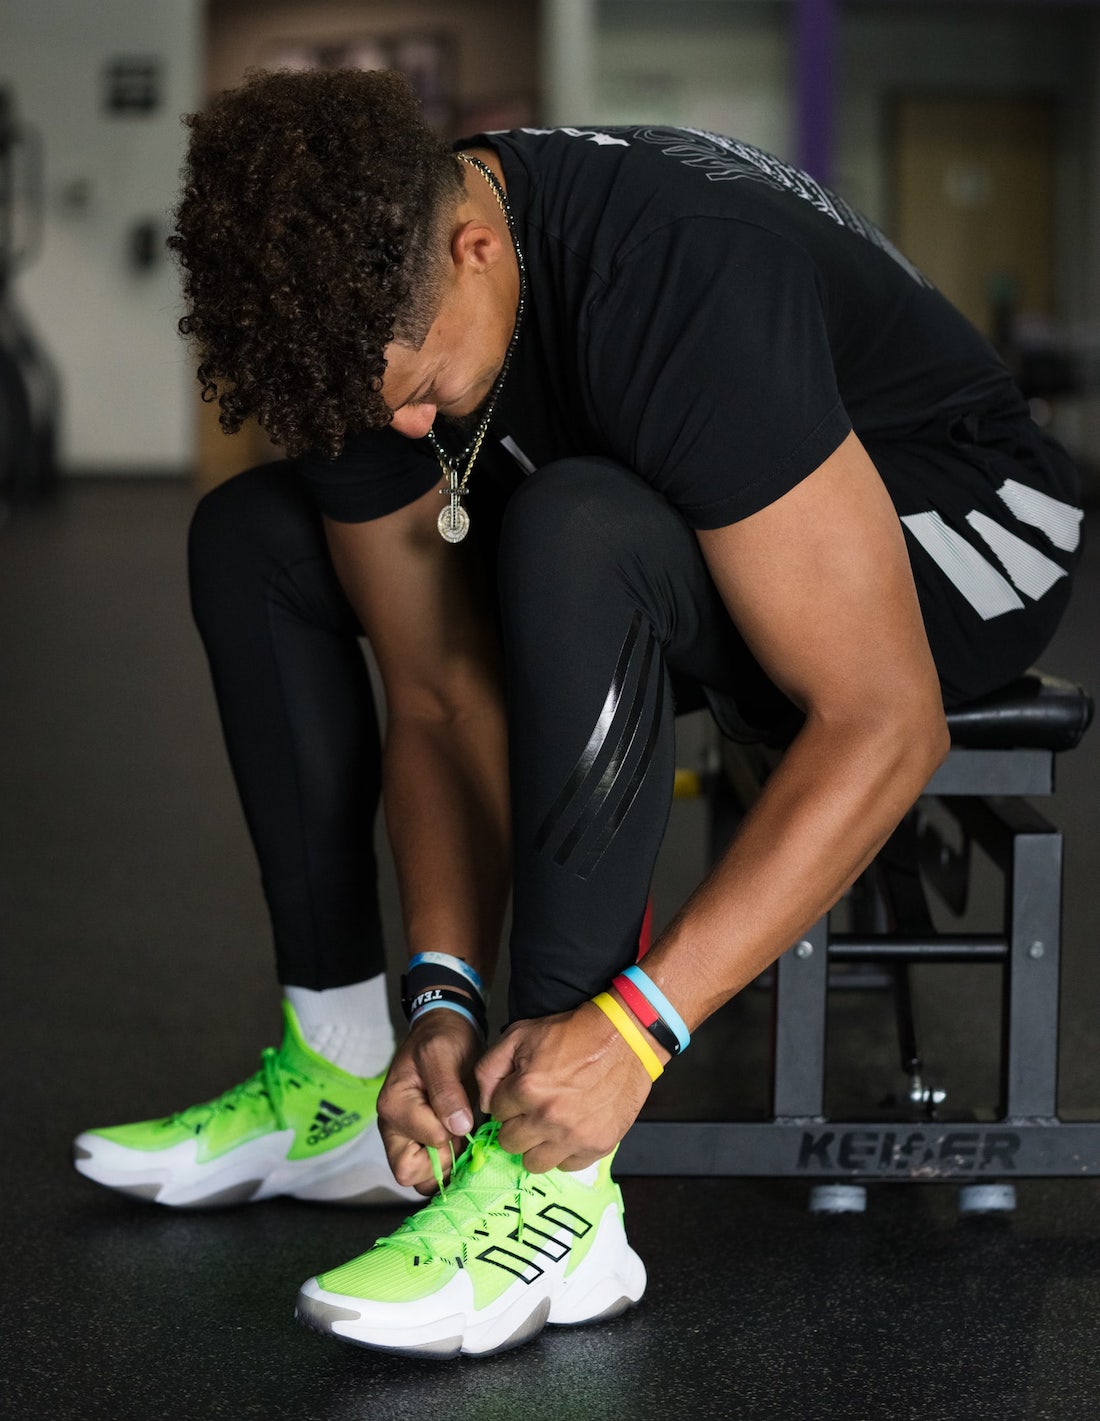 Patrick Mahomes’ favorite Adidas shoes are for tough workouts – UP23H